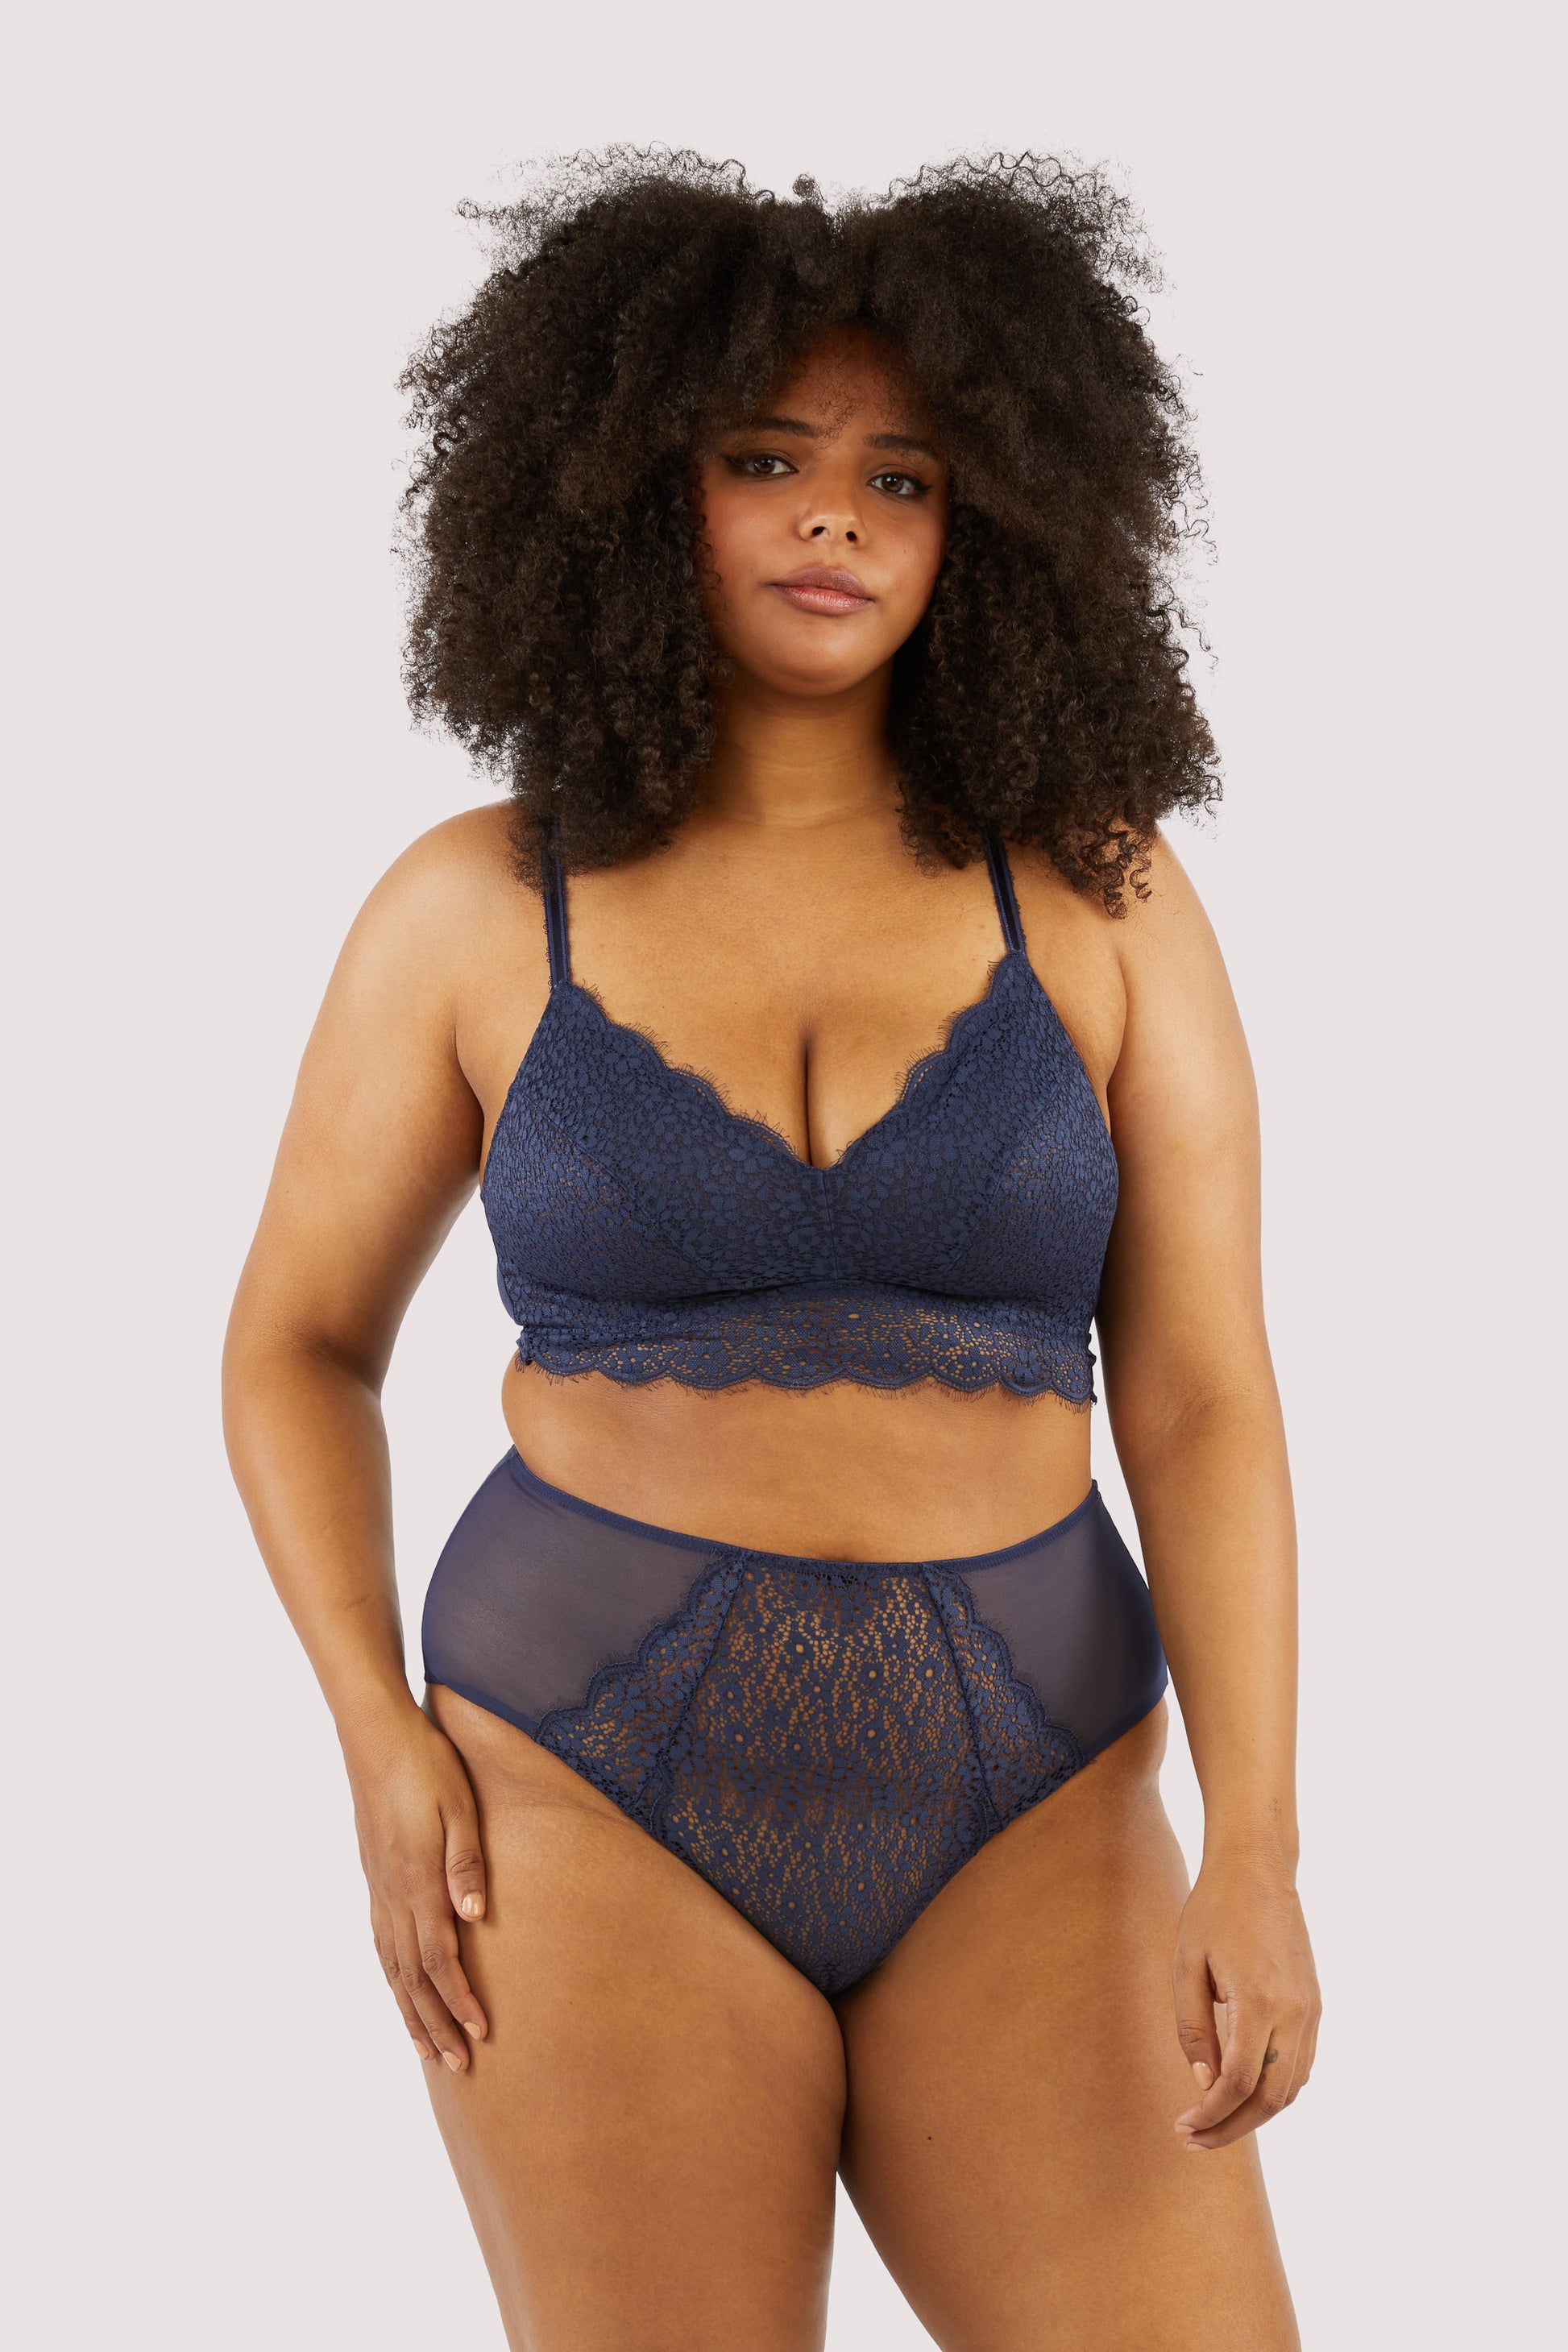 Bras Add 3 Cup Sizes, Wireless Bras Large Busts